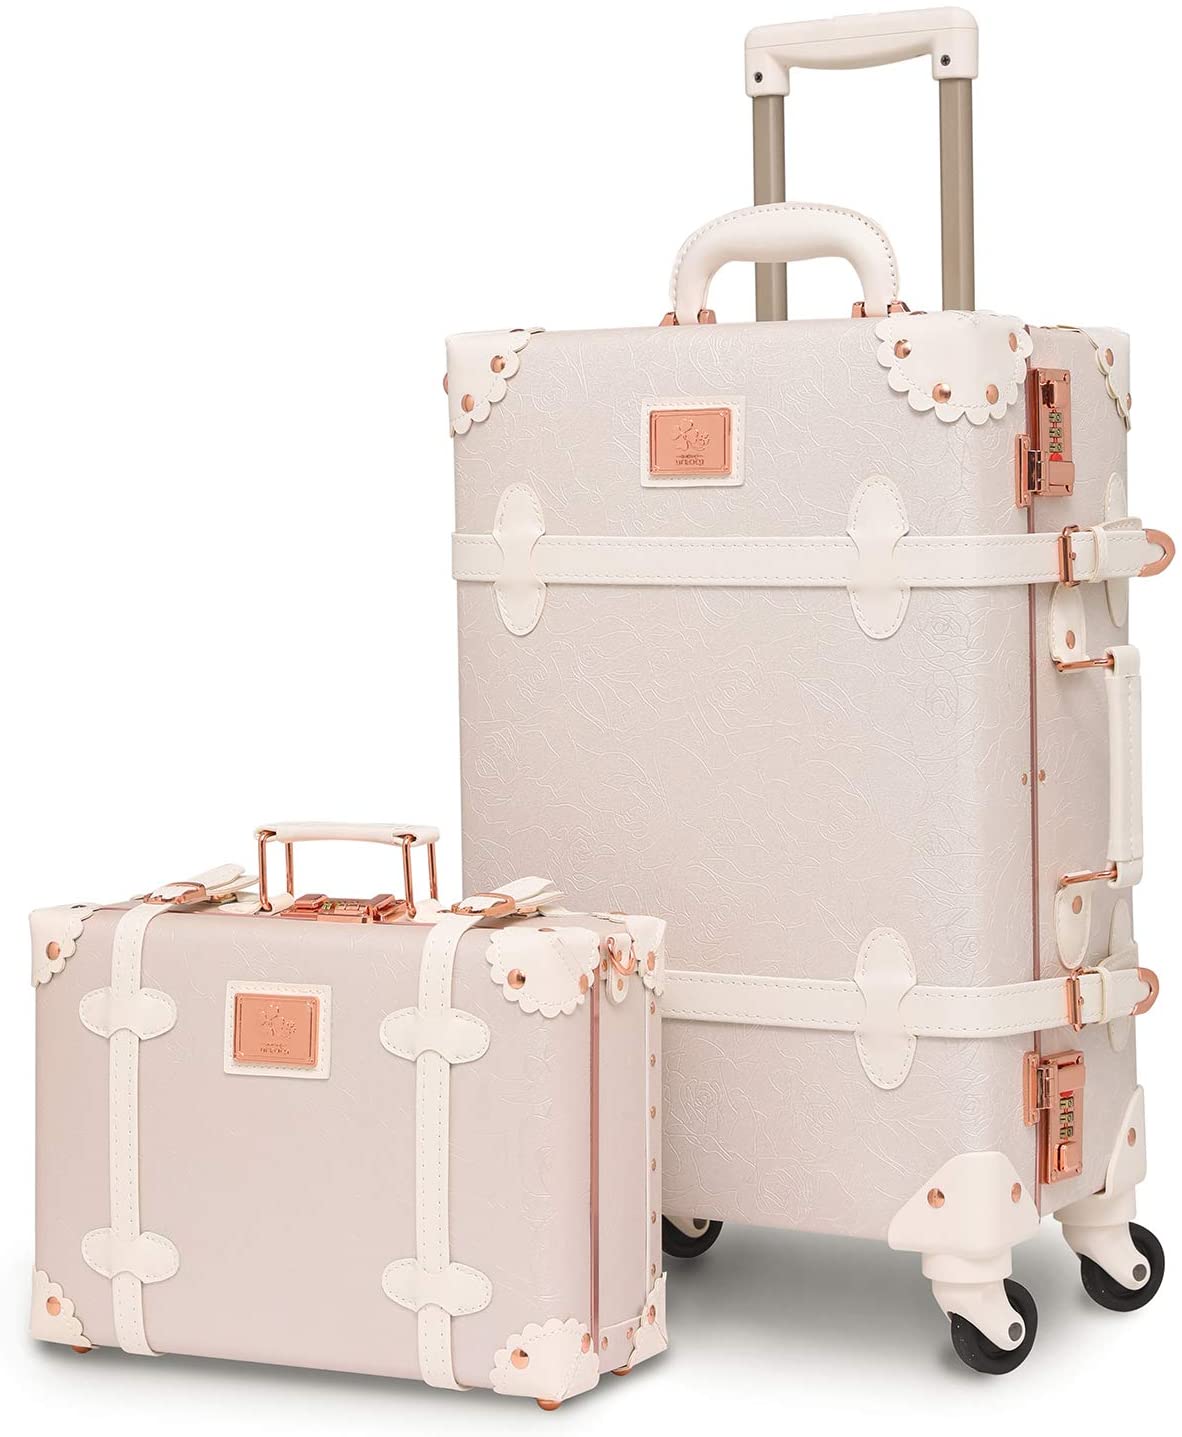 The 10 Best Vintage-style Suitcases